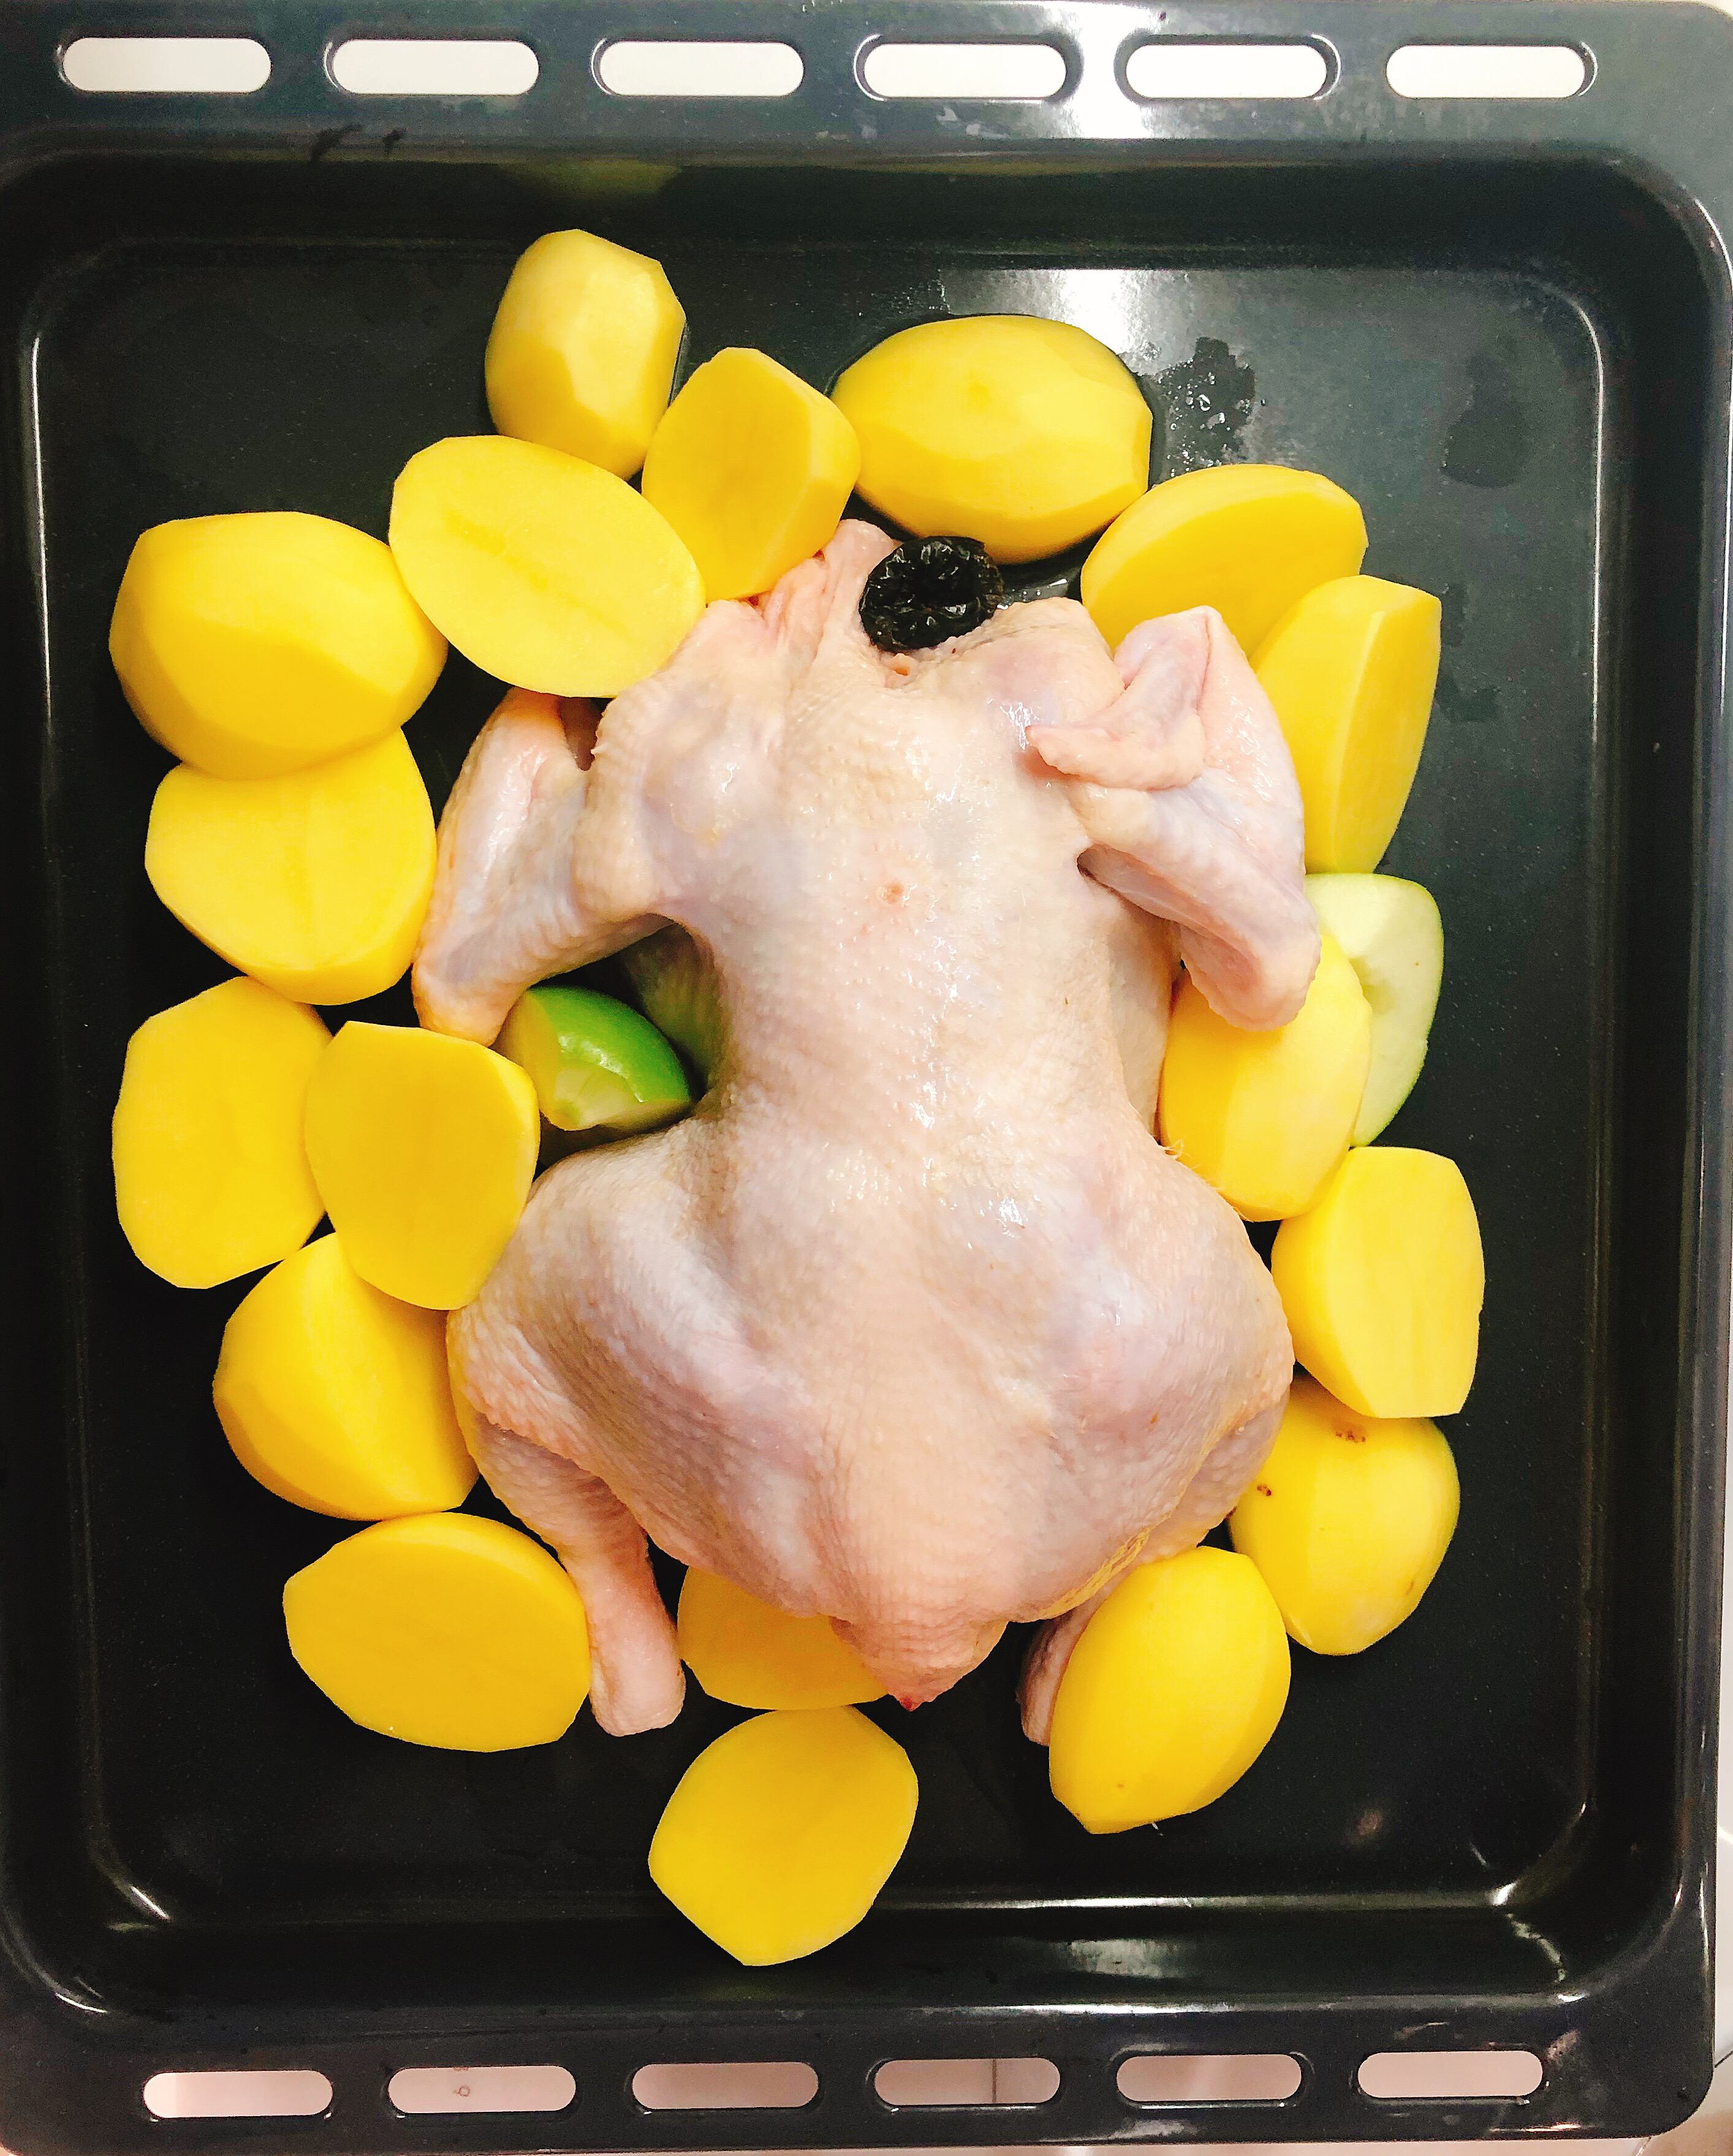 Whole chicken on the baking dish